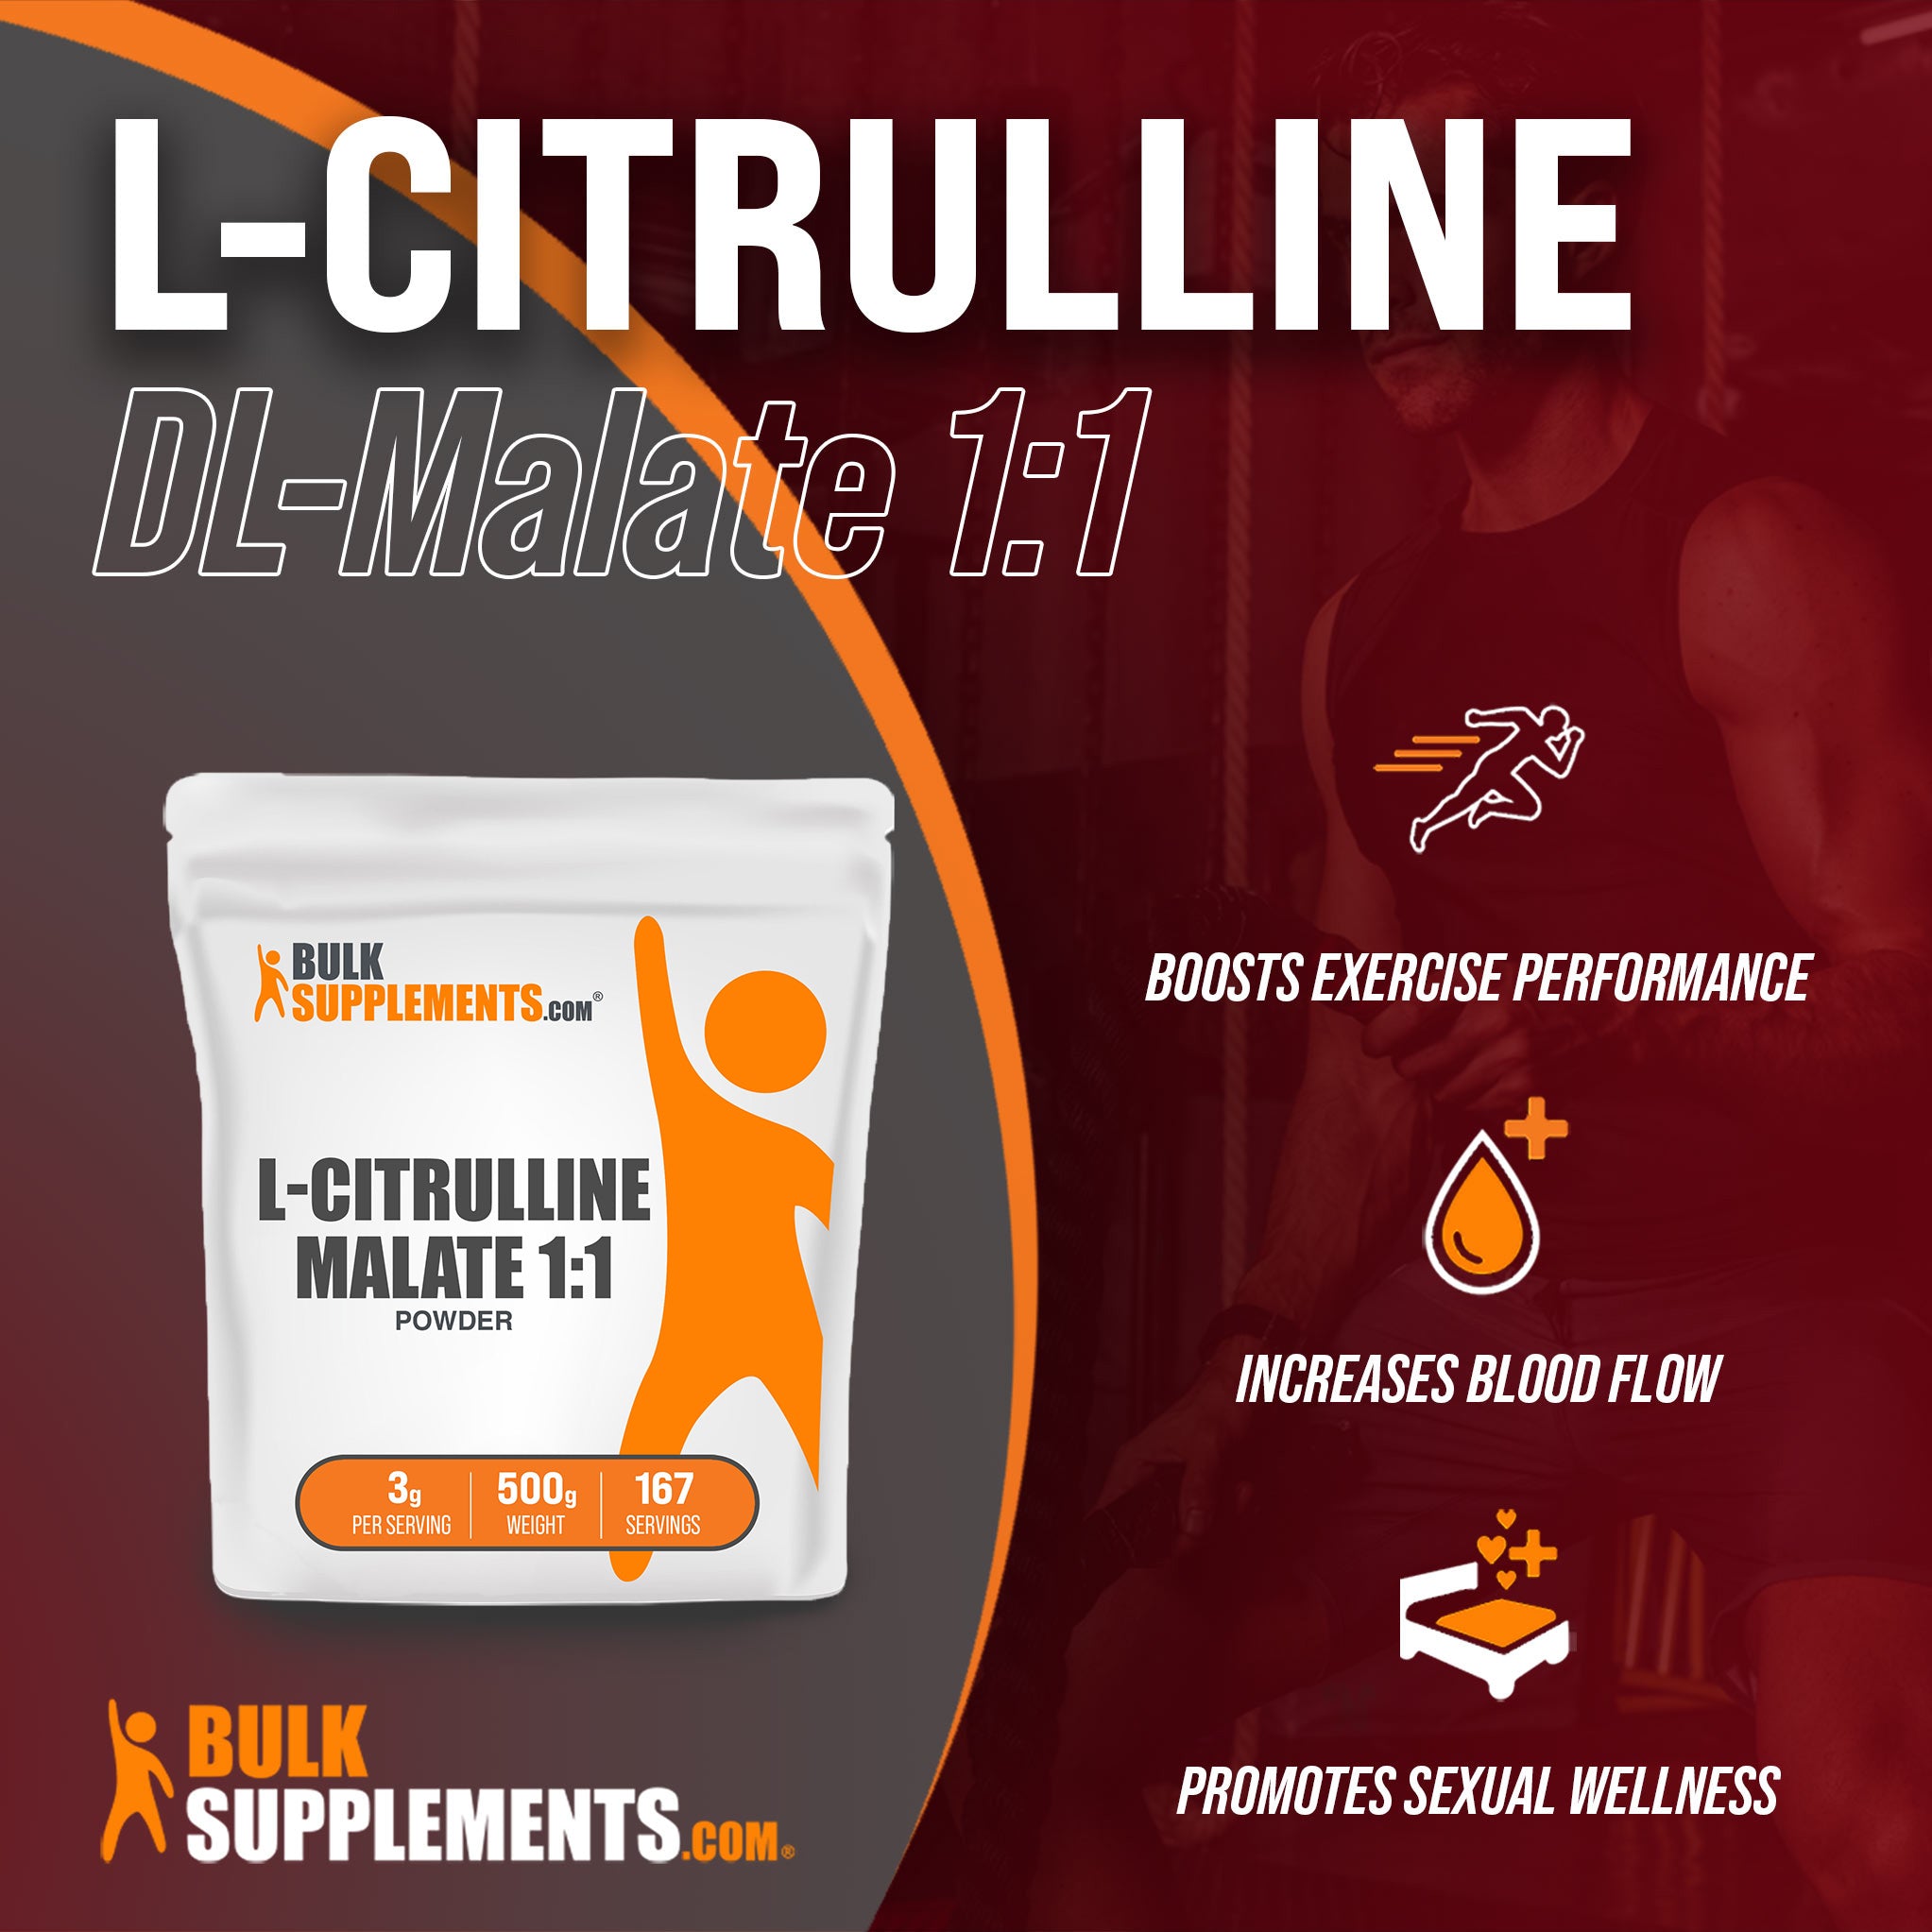 Pure L-Citrulline DL-Malate 1:1 from Bulk Supplements 